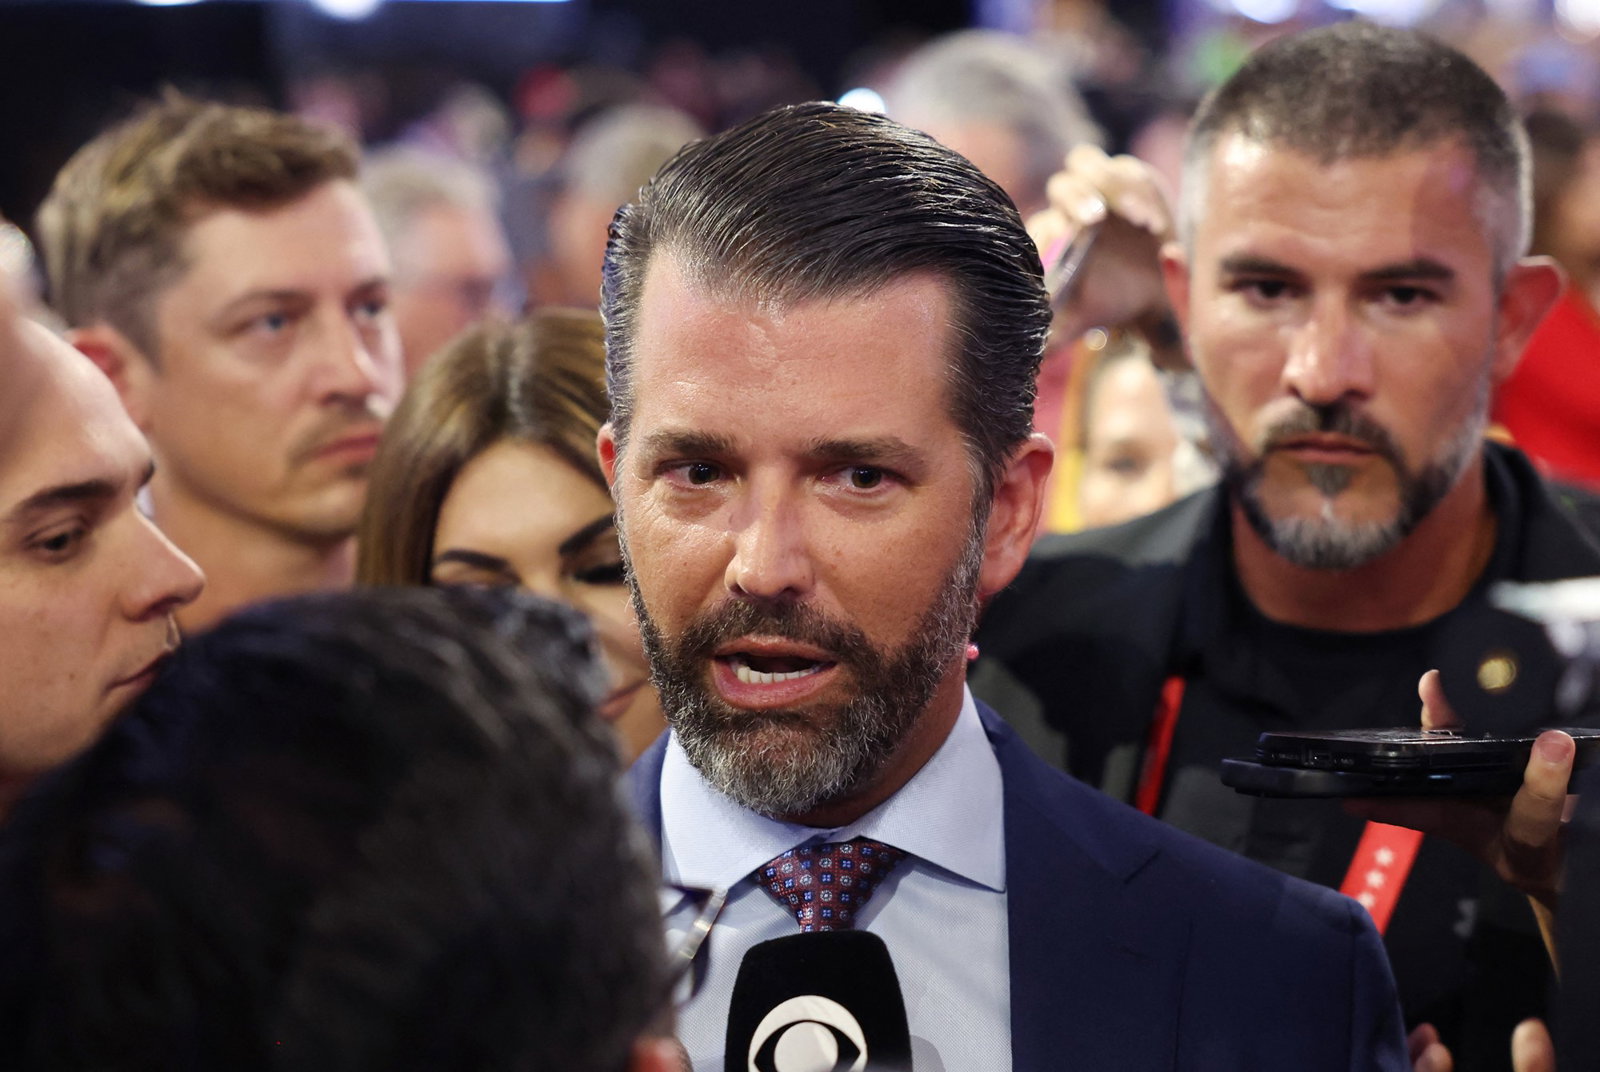 Donald Trump Jr speaks into a reporter's microphone. There's a crowd behind him.